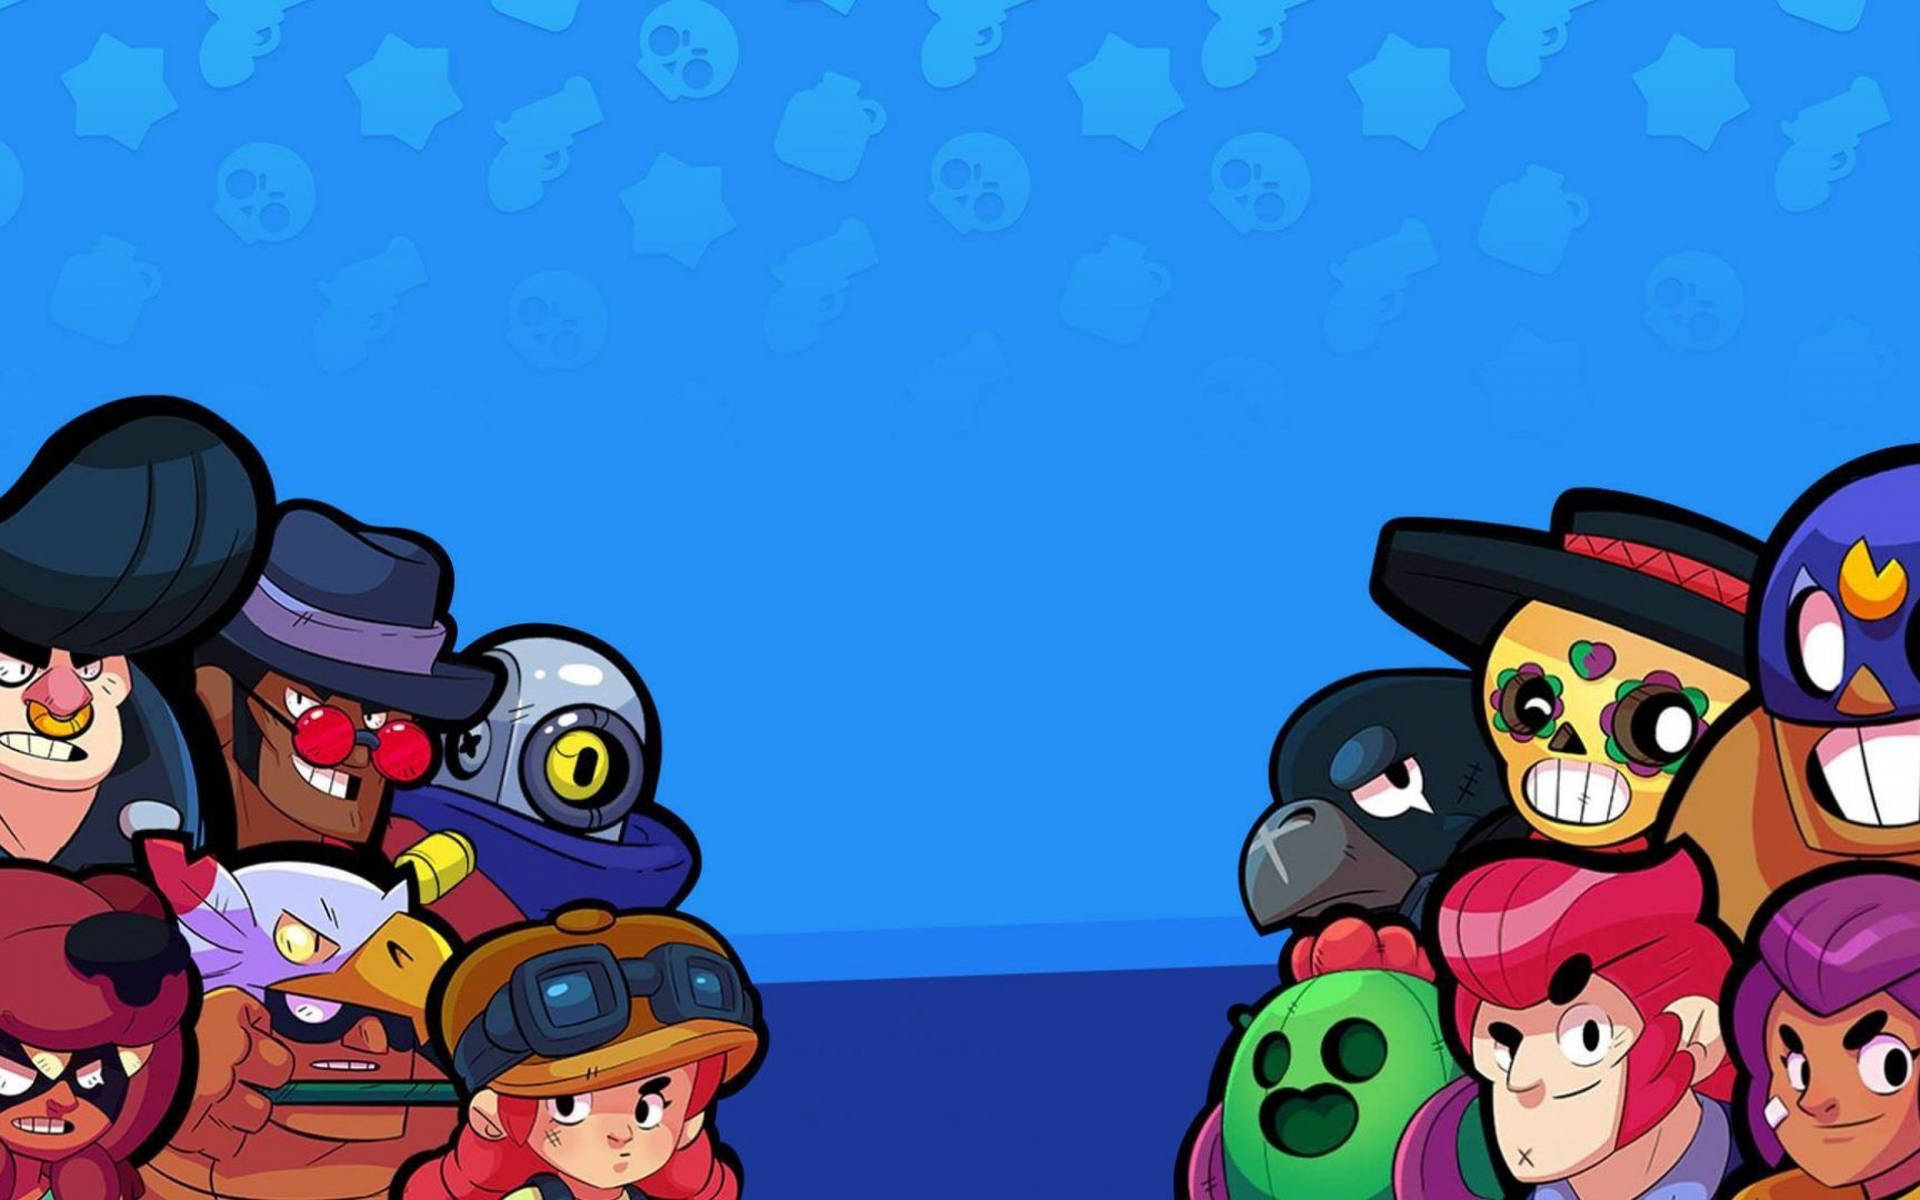 Experience the action of Brawl Stars! Wallpaper